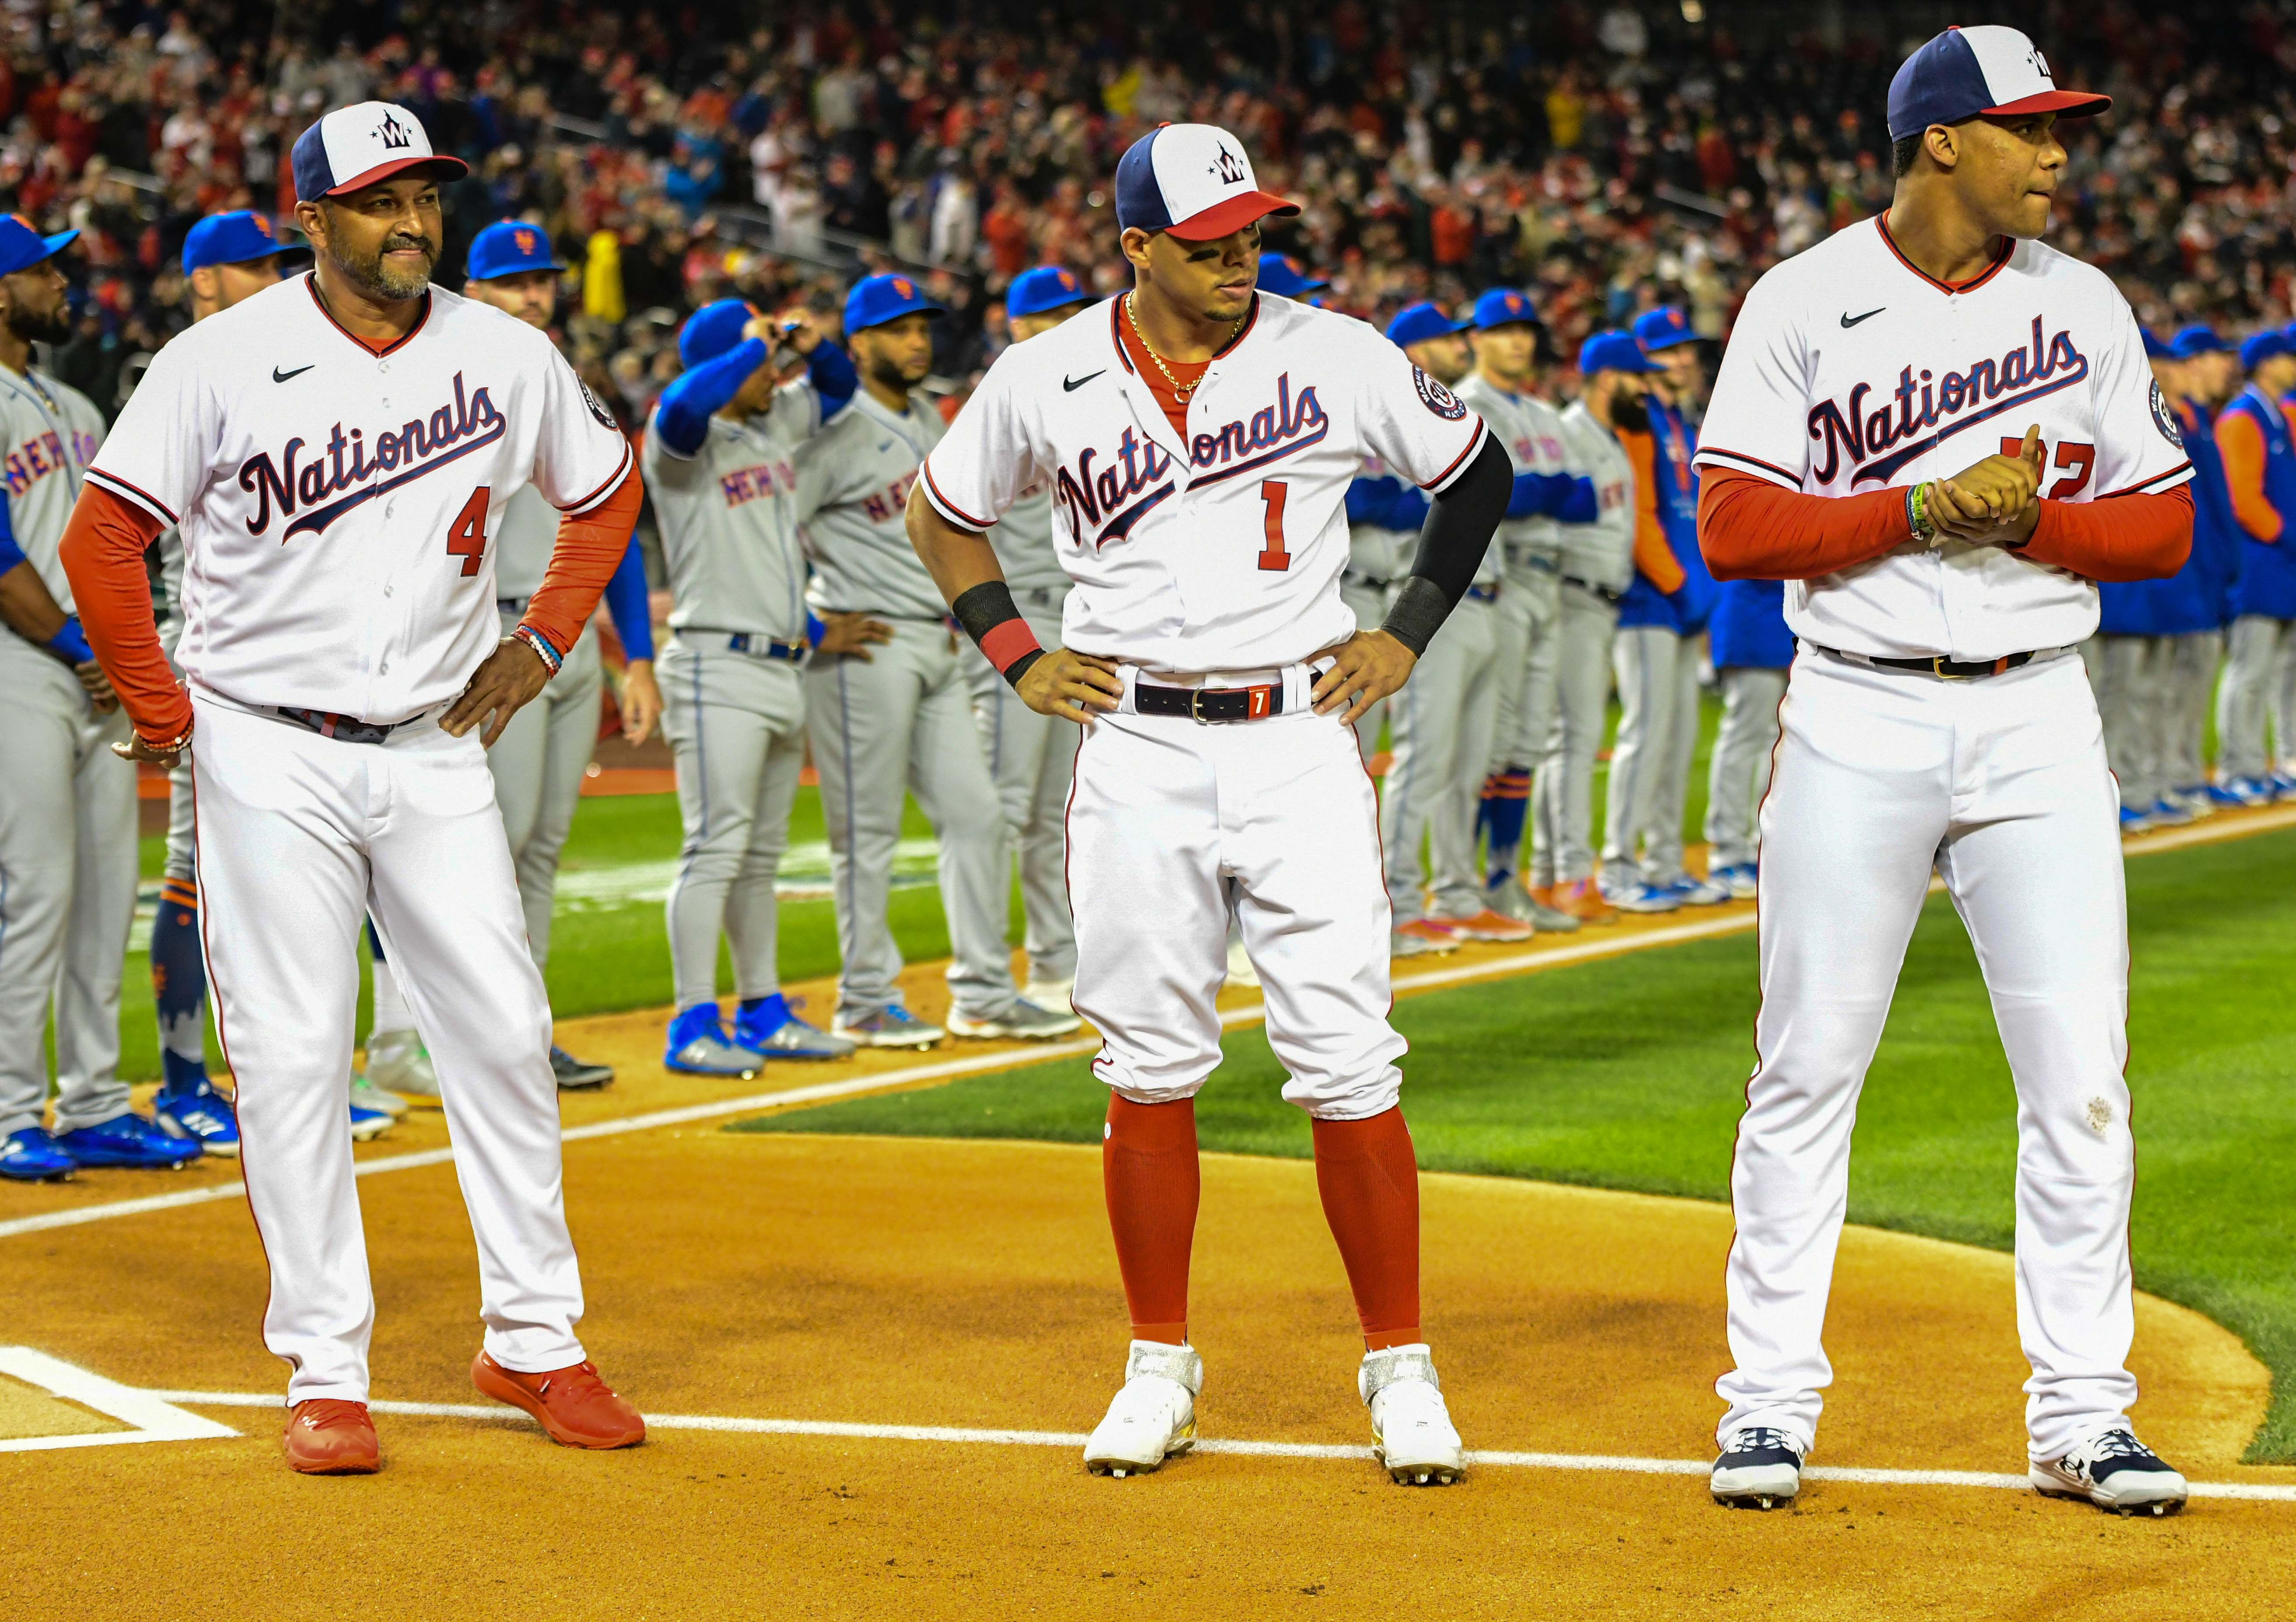 Do MLB Players Wear New Uniforms Every Game?